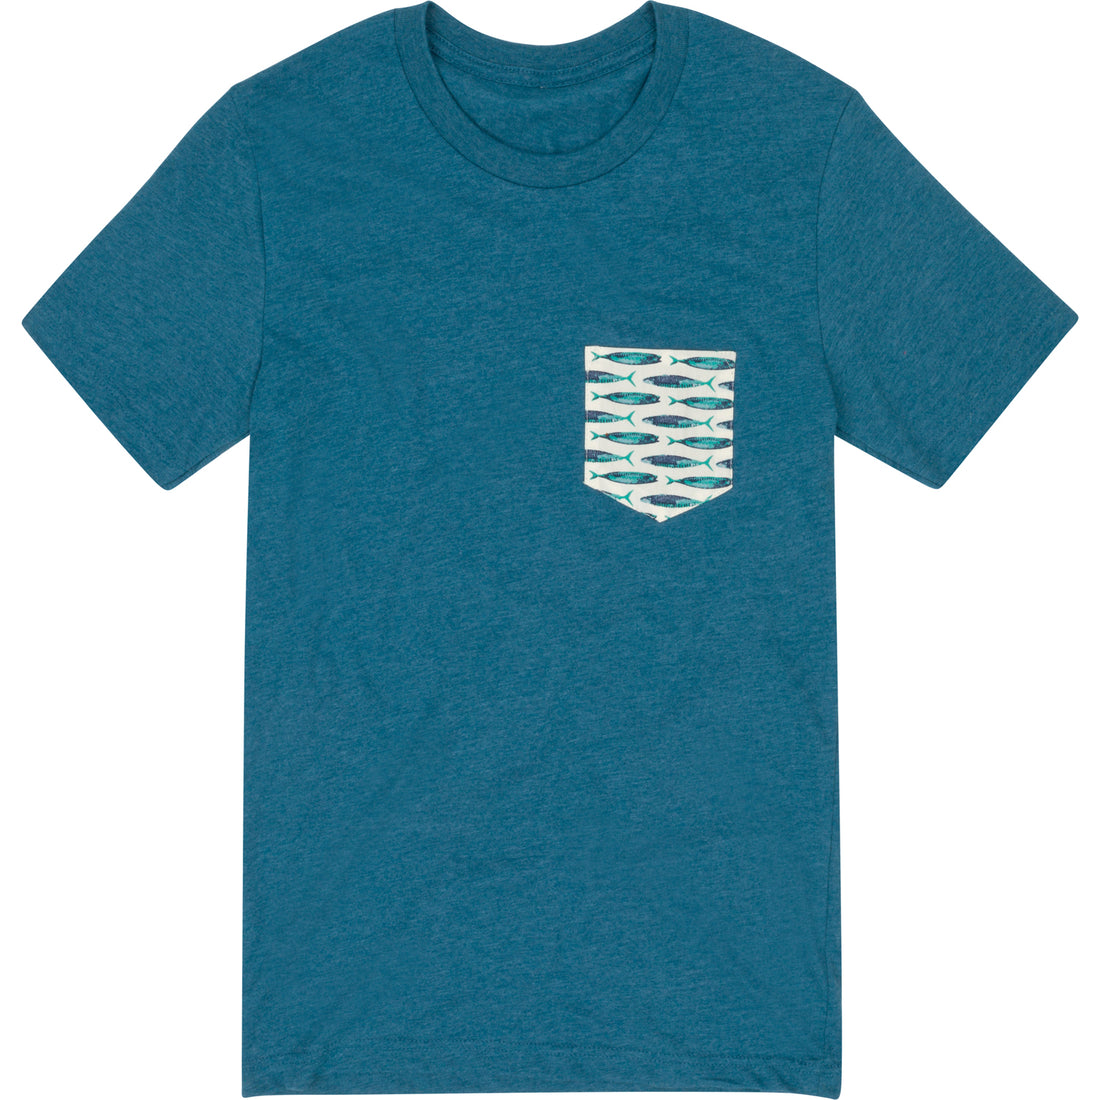 Teal Blue With Summer Fish  Pocket T-Shirt